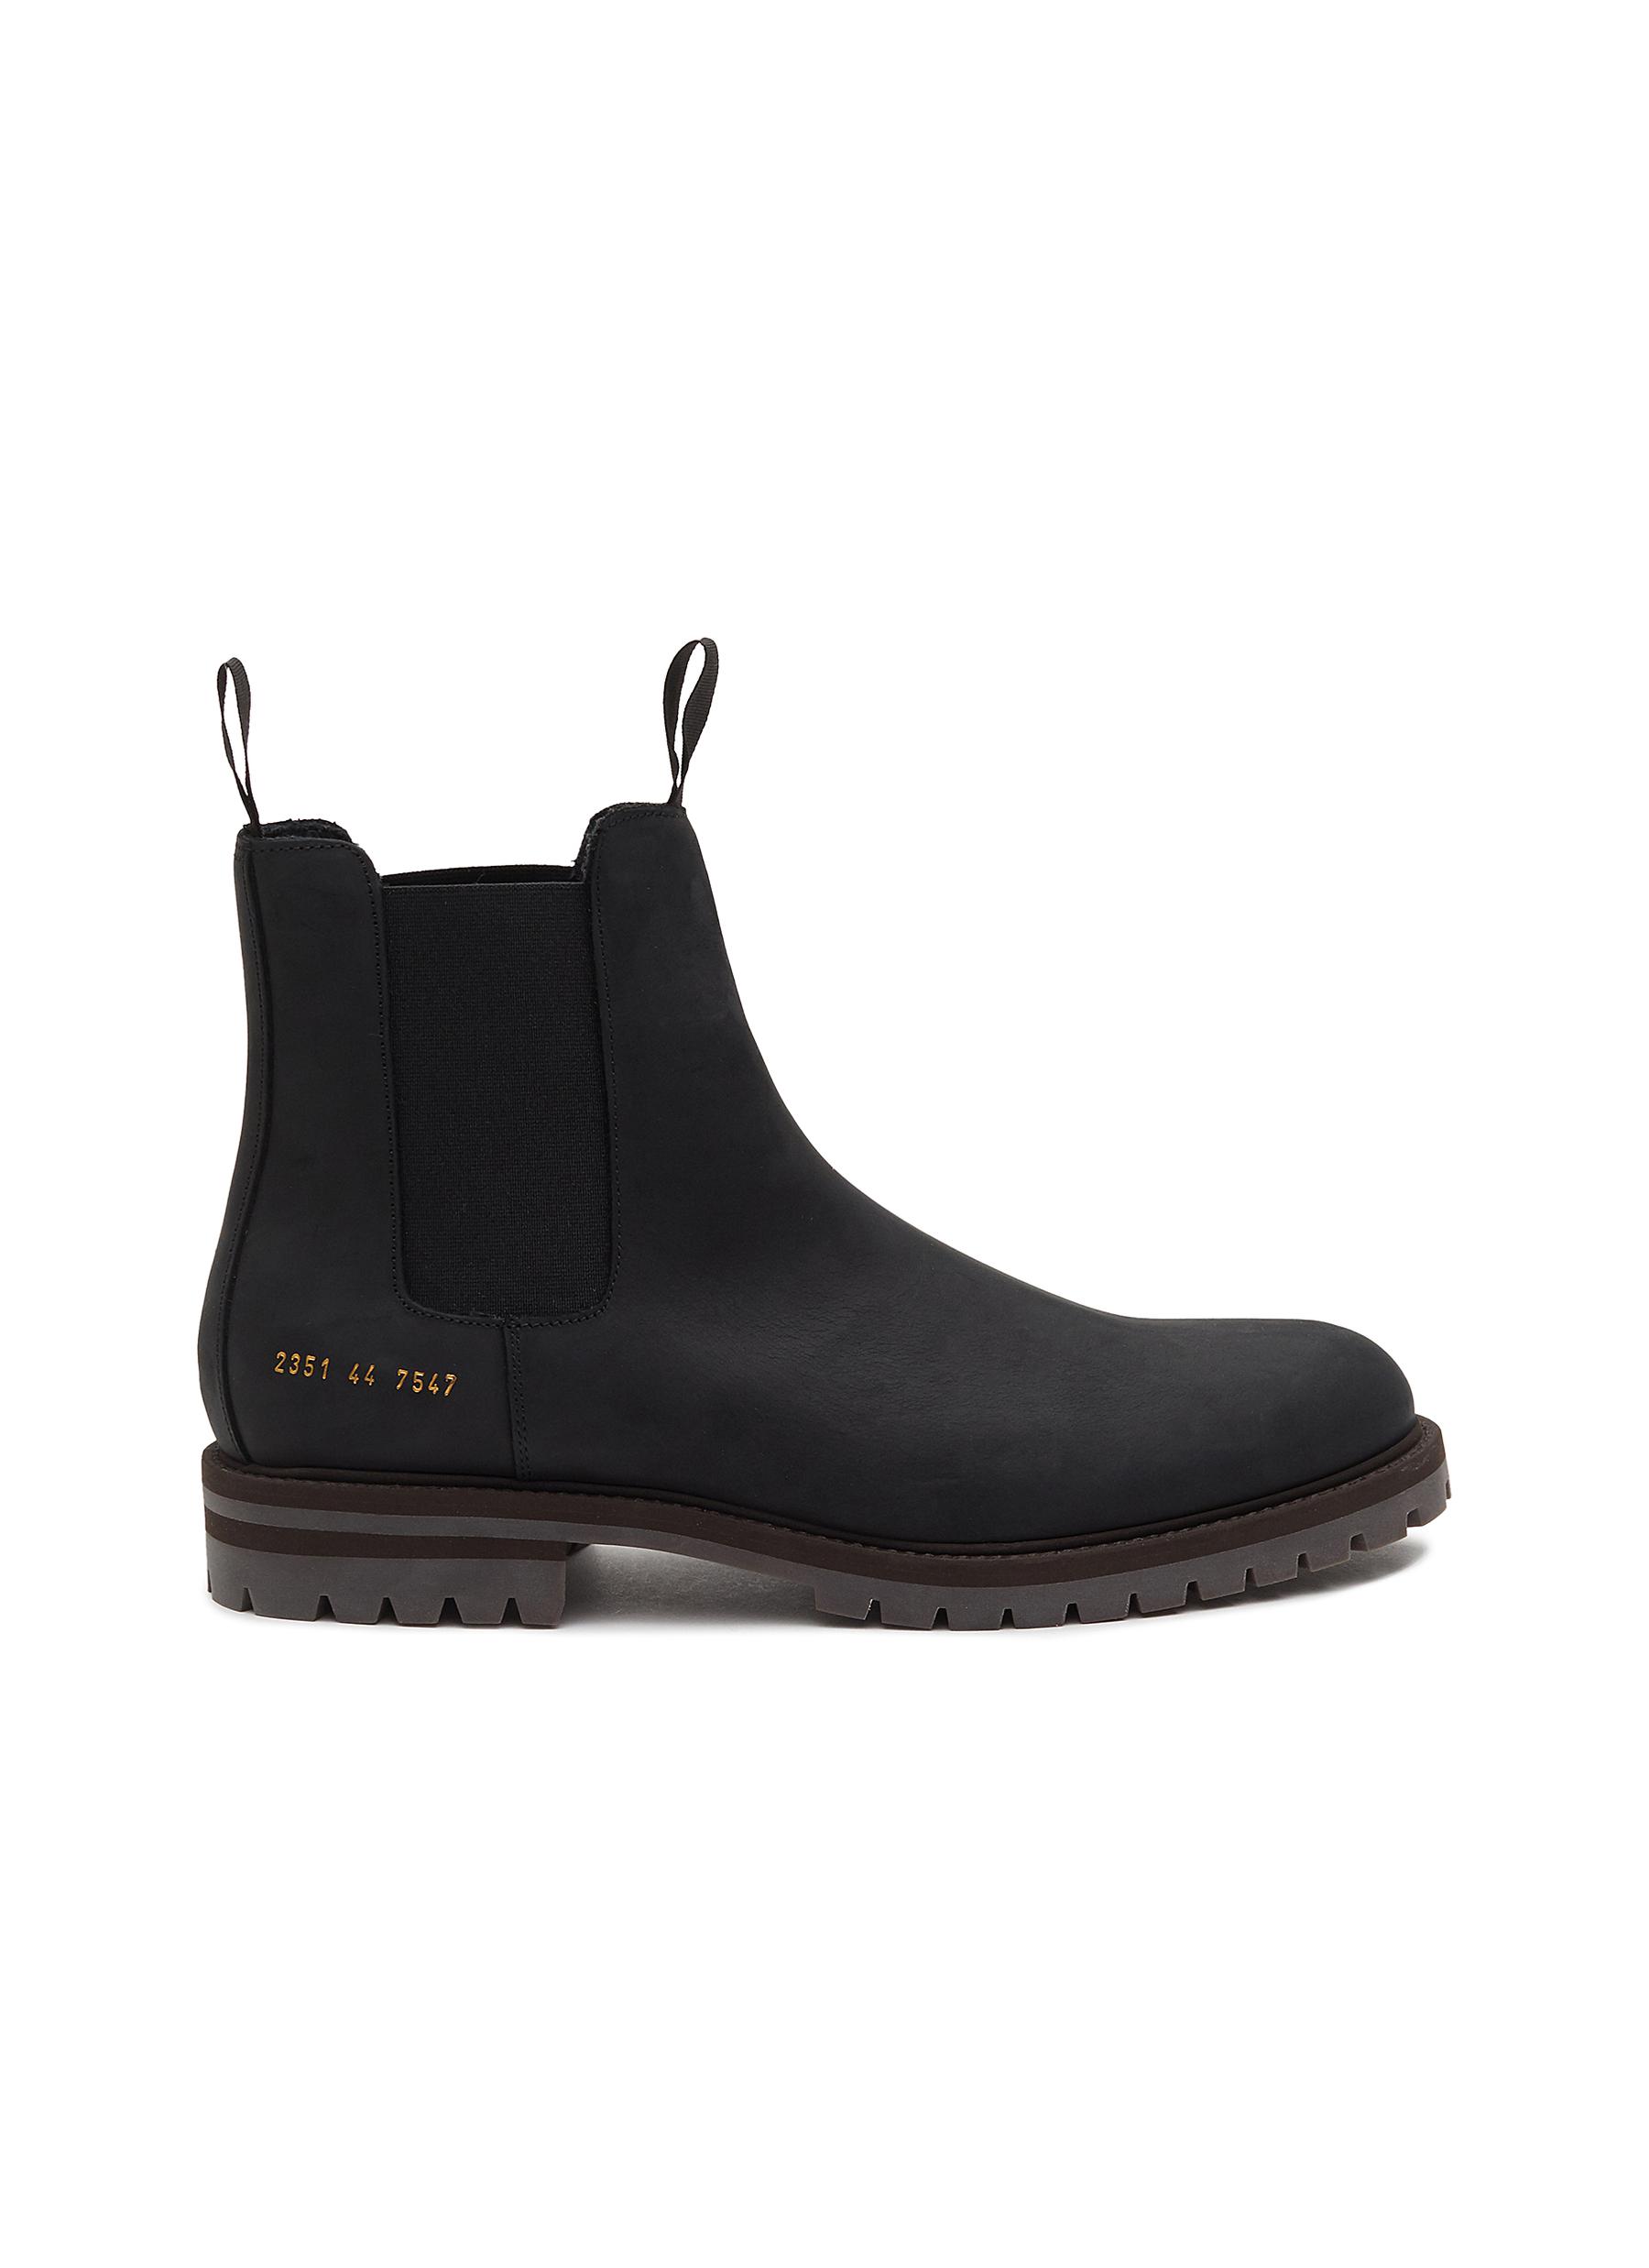 'Winter' Lug Sole Leather Chelsea Boots